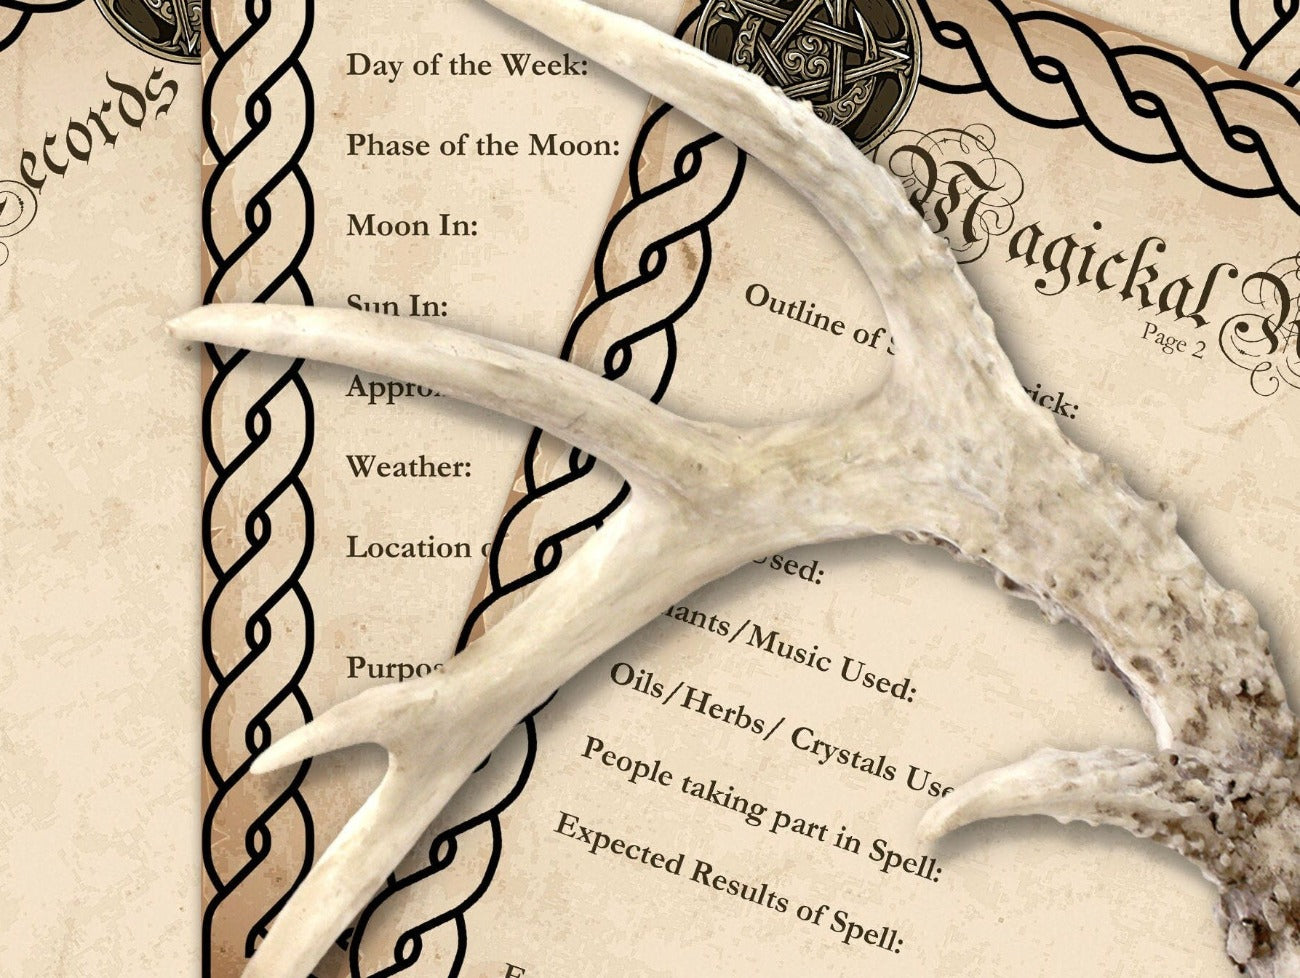 MAGICKAL RECORDS, close-up view of the parchment pages andtext - Morgana Magick Spell